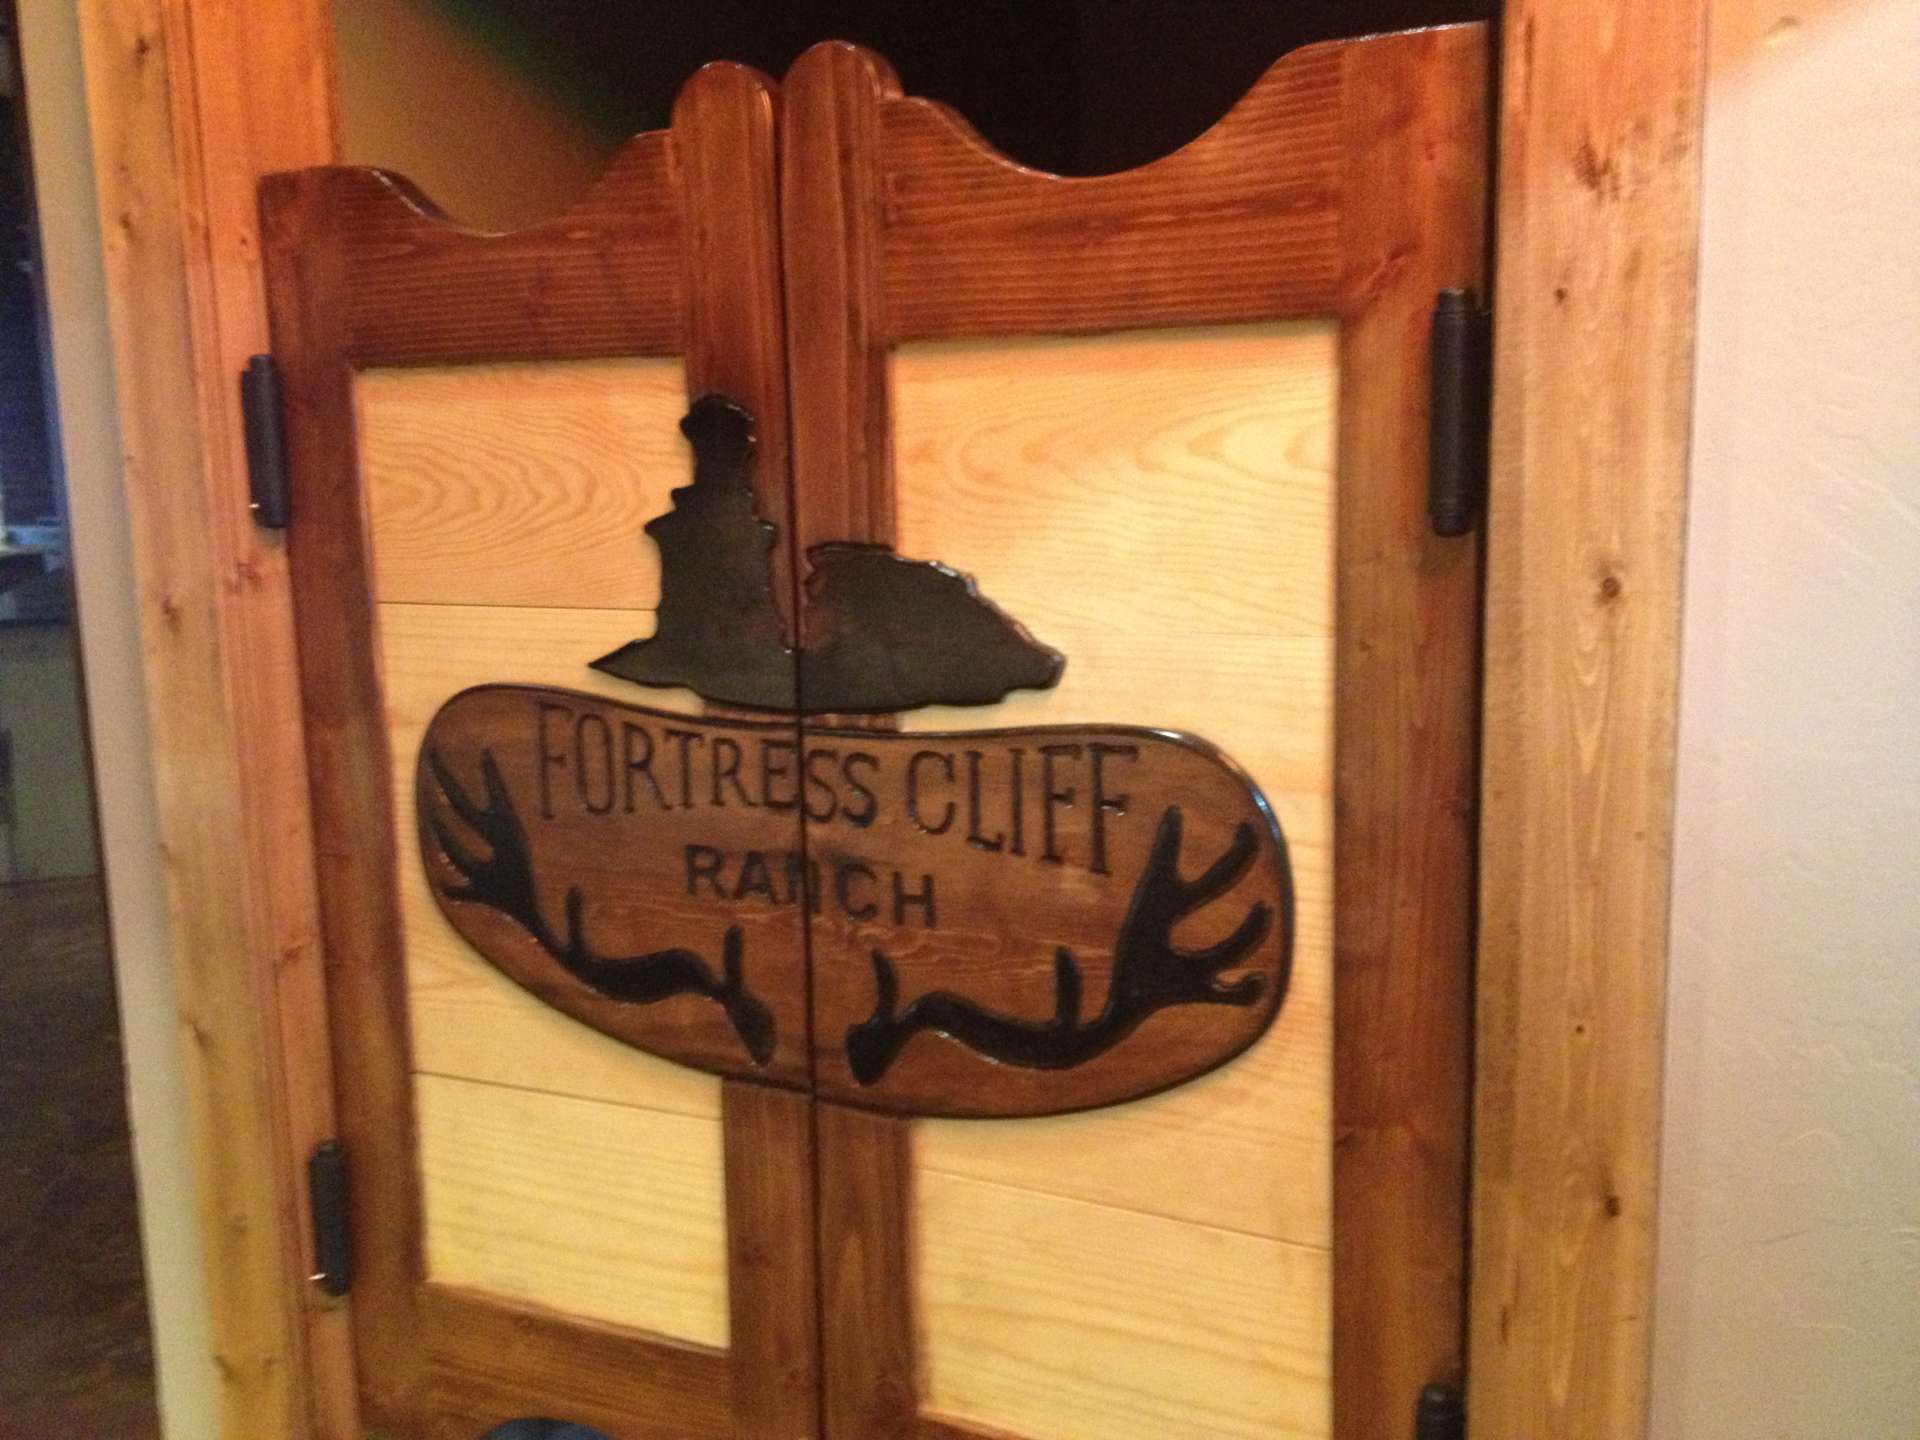 Custom Saloon Doors that say fortress cliff ranch